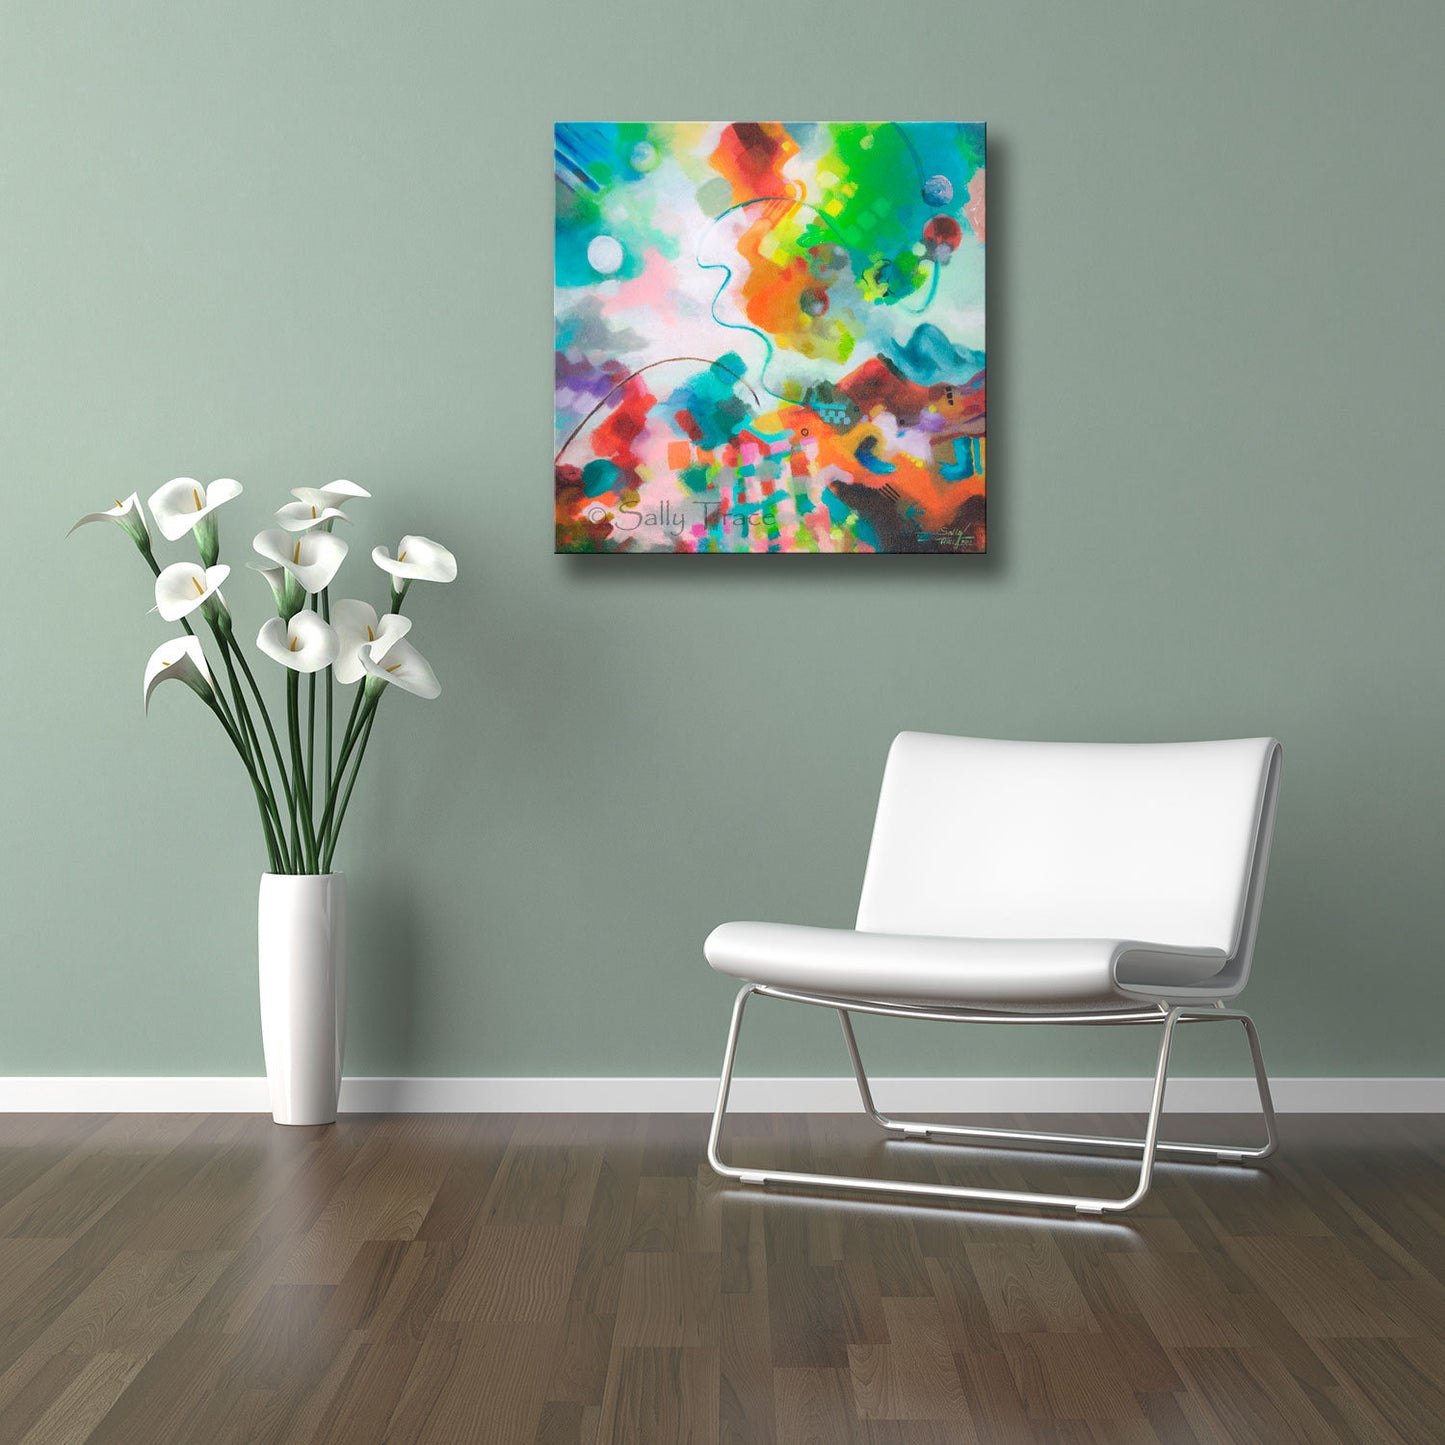 Giclee print on stretched canvas of a textured abstract landscape painting "Lasso Moon" © Sally Trace, room view with Calla Lilies and chair